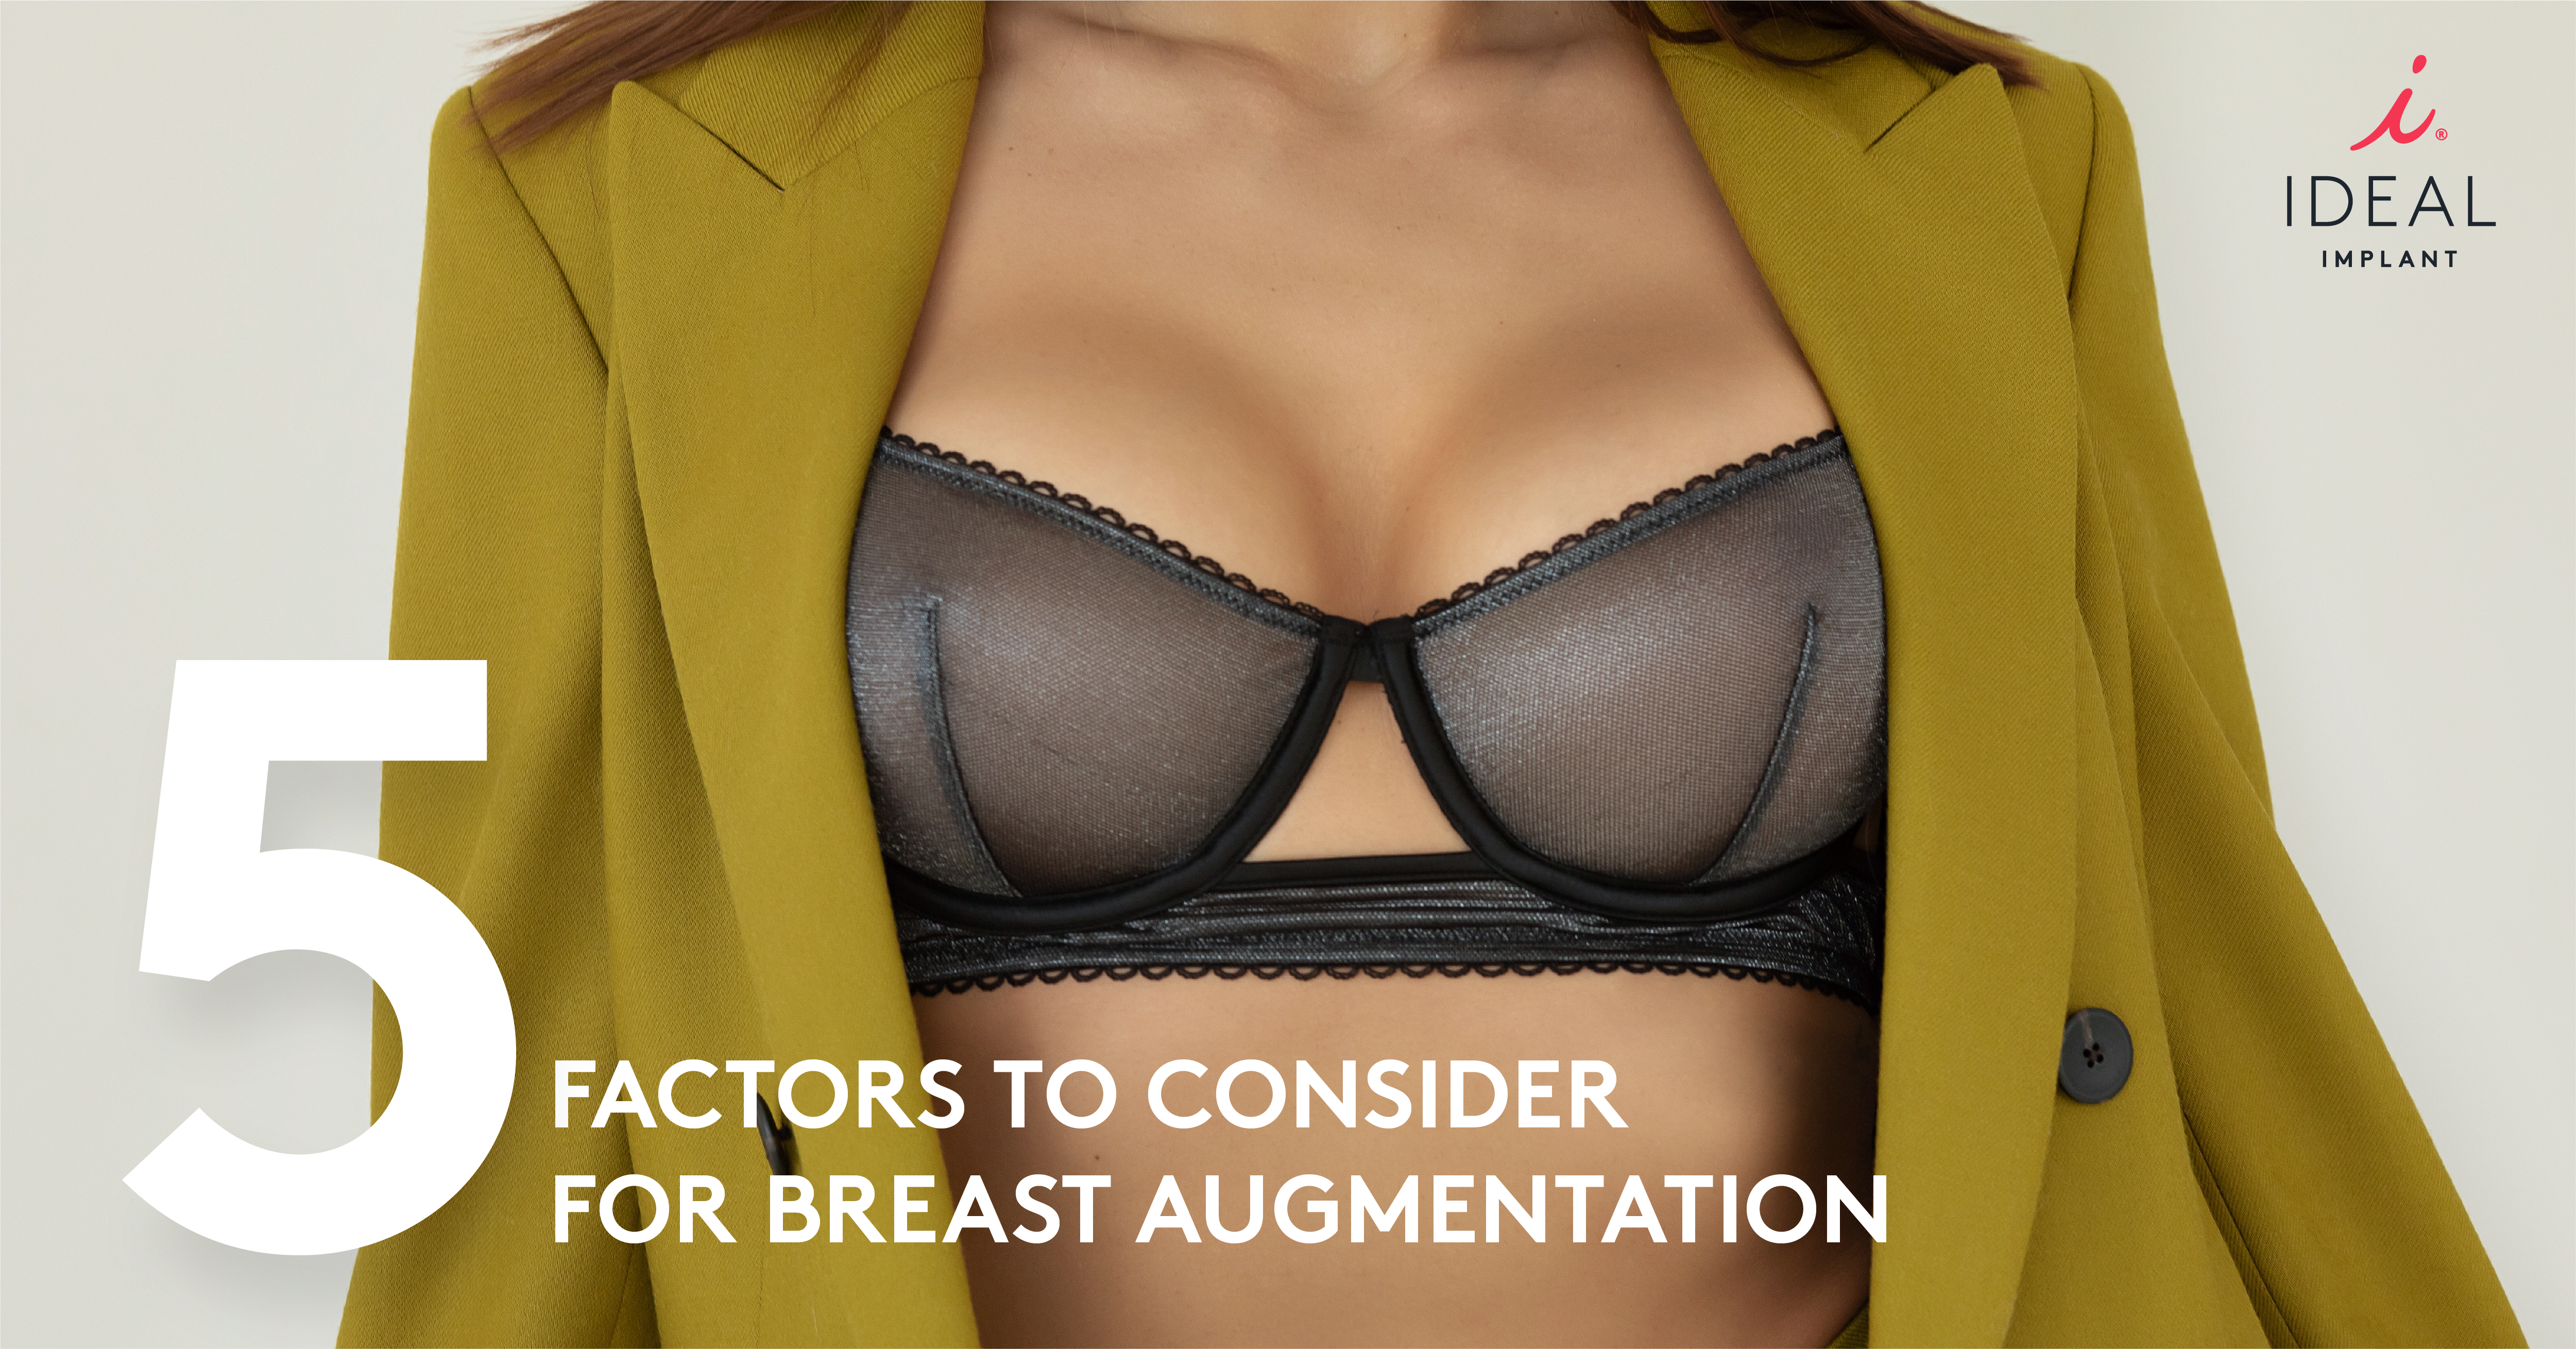 Close-up of Woman's Chest Wearing a Bra and Jacket - 5 Factors to Consider for Breast Augmentation